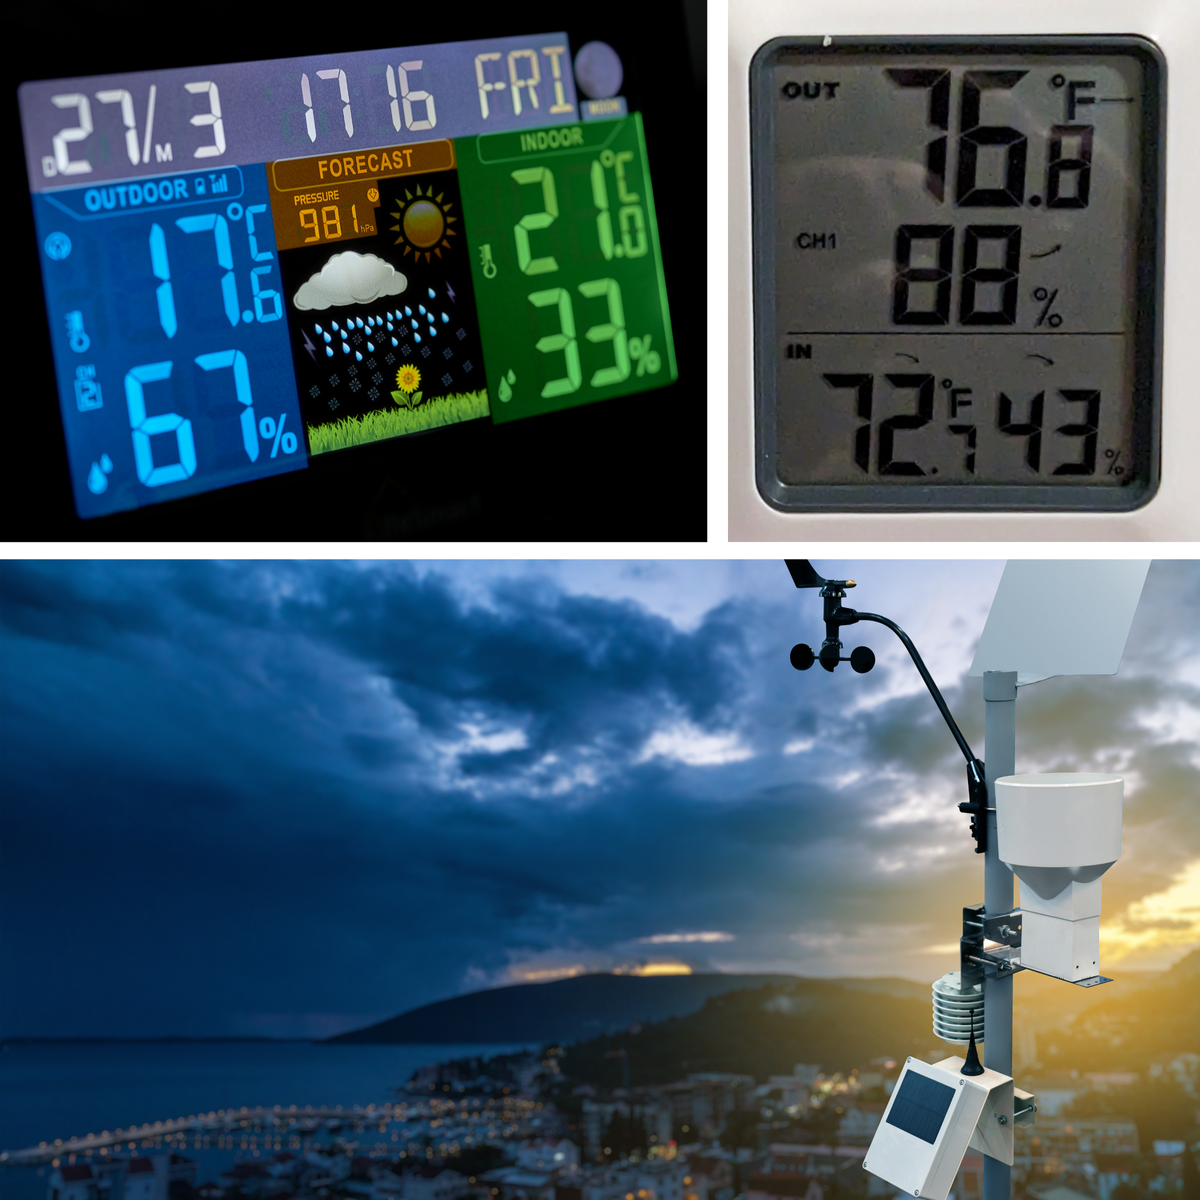 Home weather station screen, indoor outdoor thermometer, weather station above a city